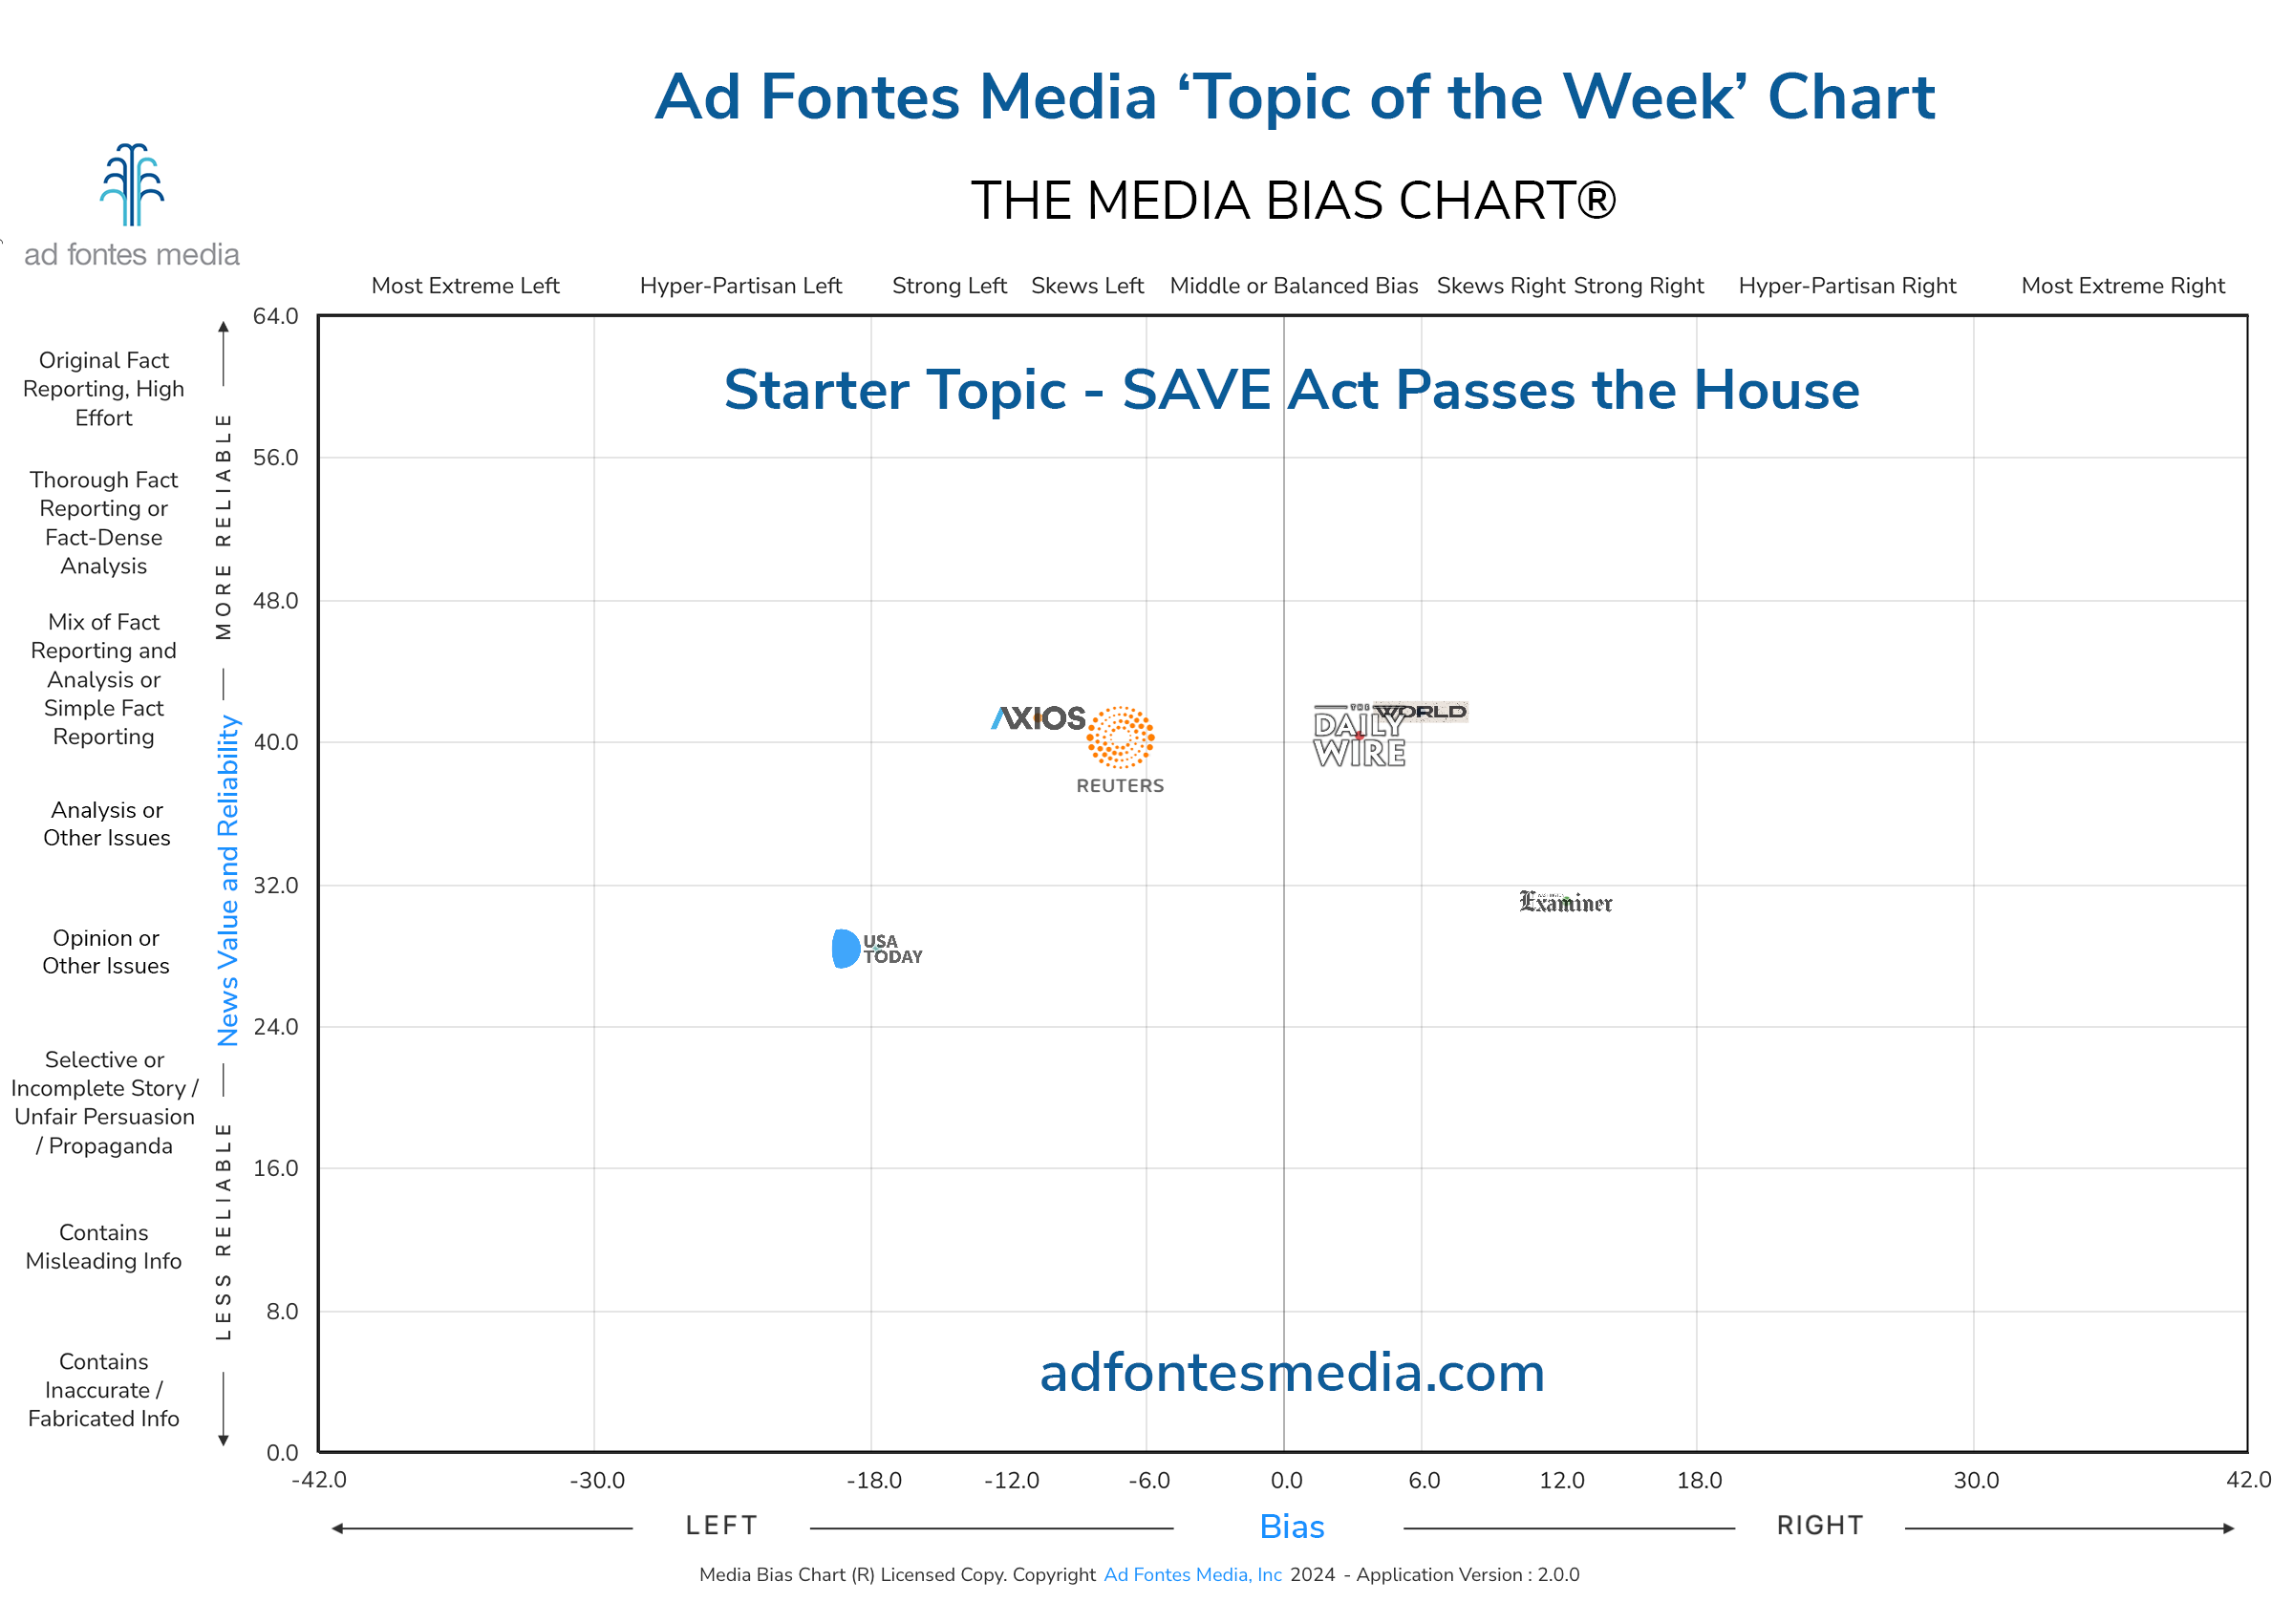 Media Bias Chart examines media coverage of the Safeguard American Voter Eligibility (SAVE) Act